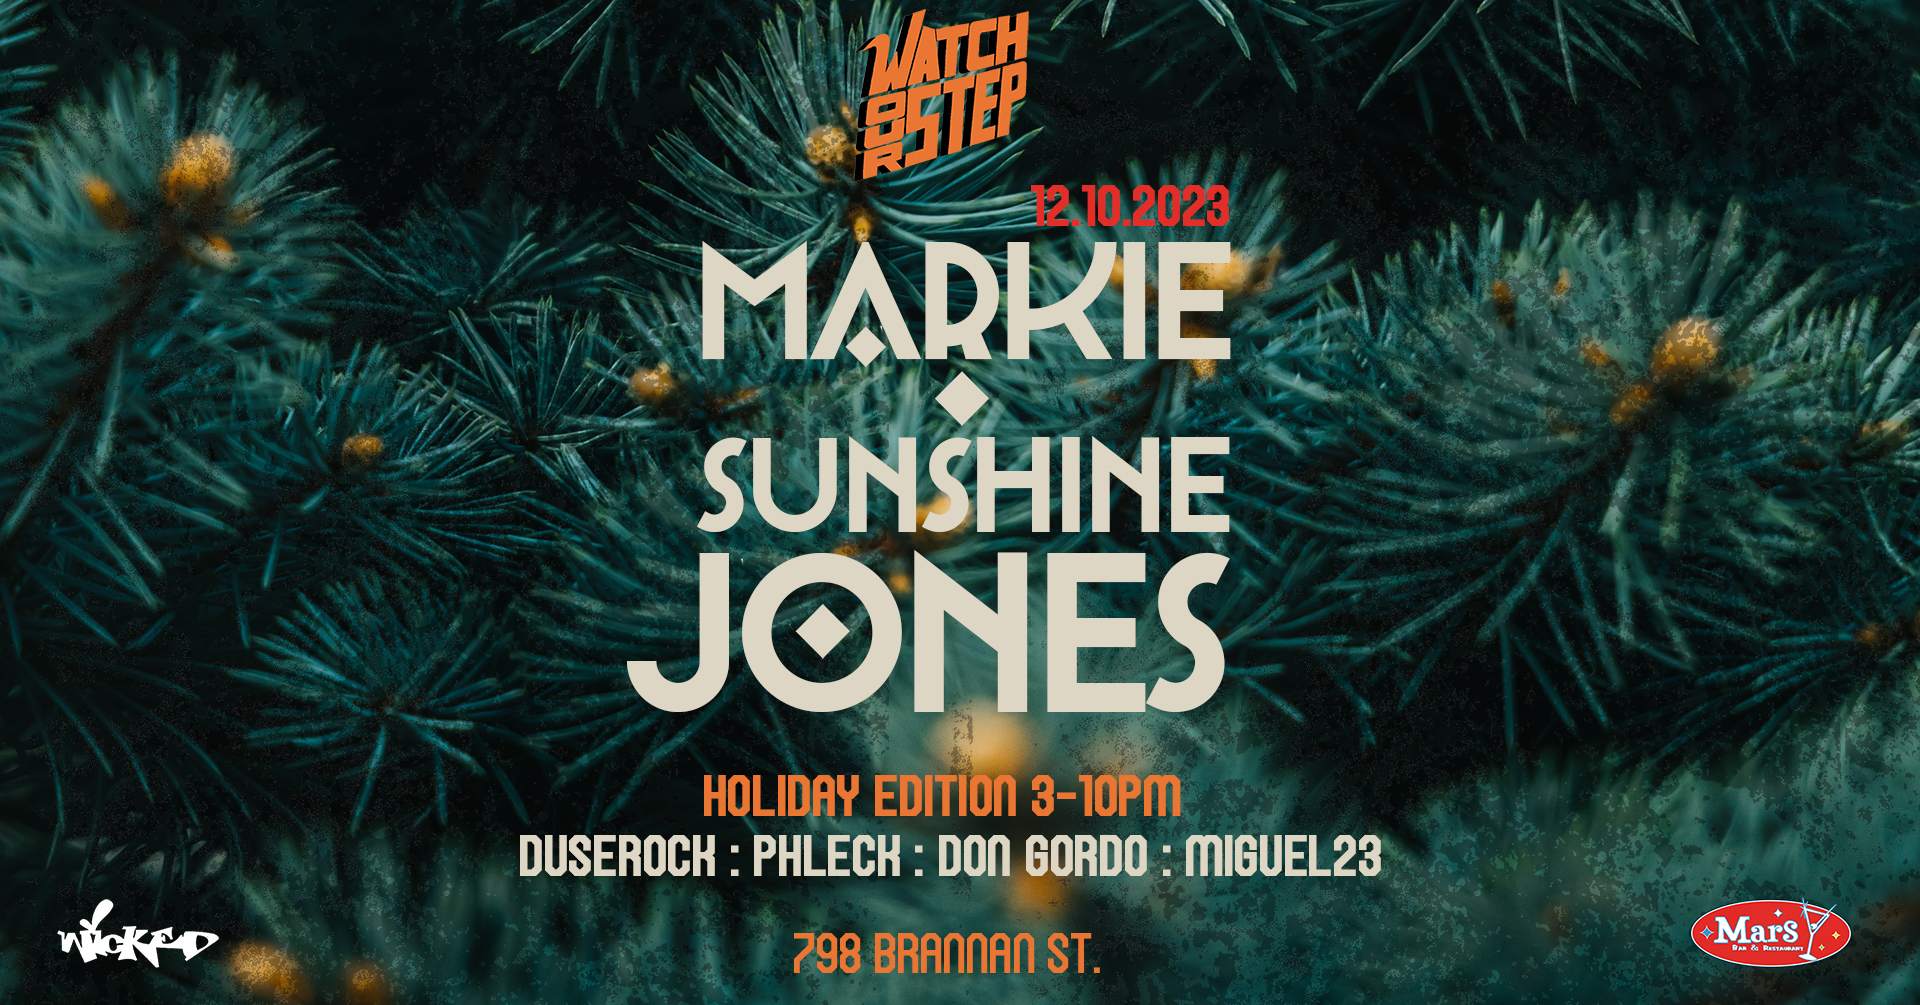 Watch Our Step Holiday Edition feat. Markie and Sunshine Jones - フライヤー表